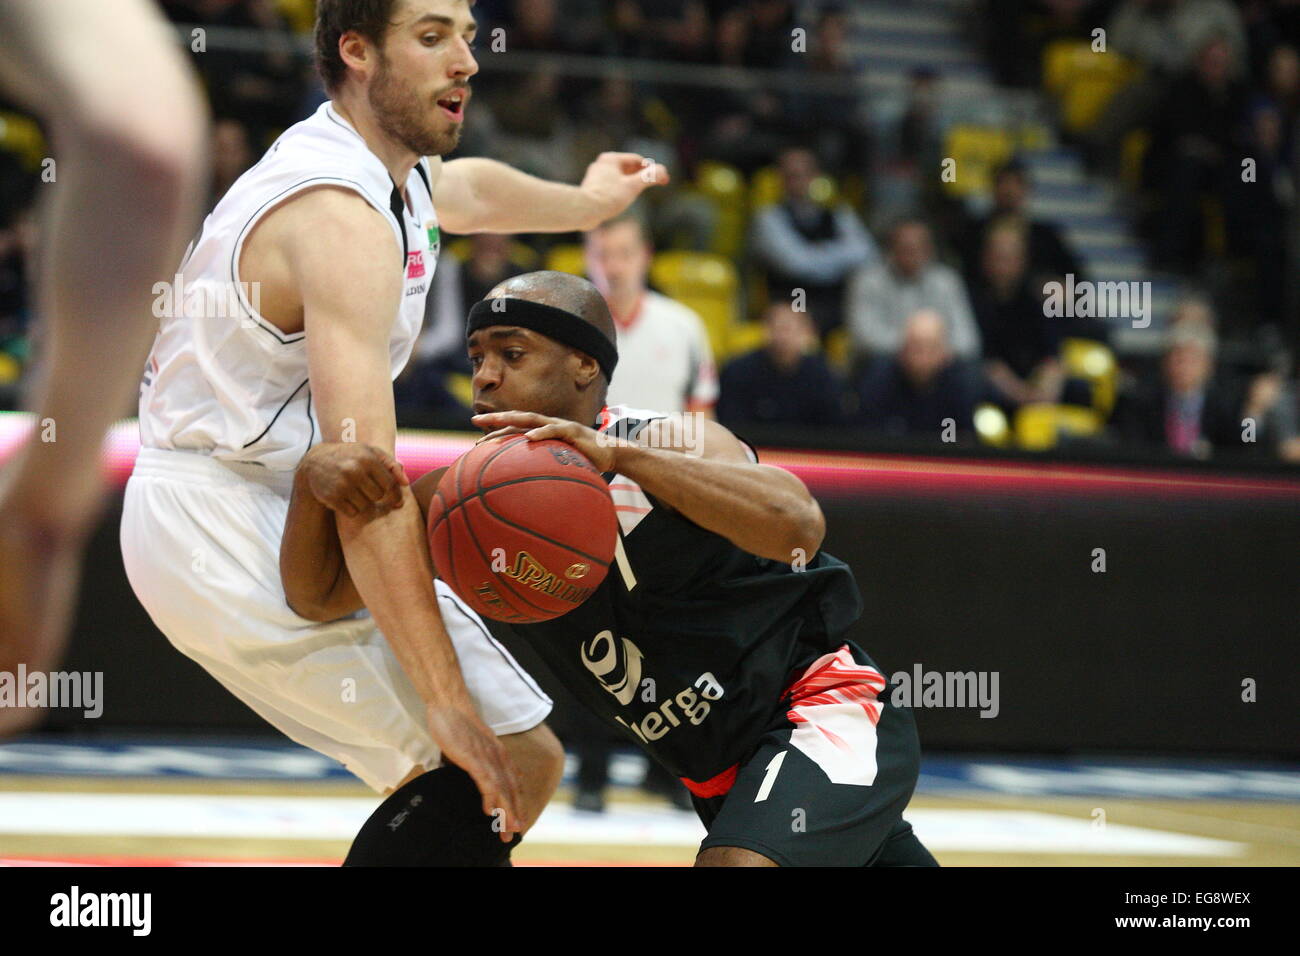 Gdynia, Poland. 19th February, 2015. Basketball: Cup of Poland final games. PGE Turow Zgorzelec faces energa Czarni Slupsk at Gdynia Arena sports hall. Jerel Blassingame (1) in action during the game Credit:  Michal Fludra/Alamy Live News Stock Photo